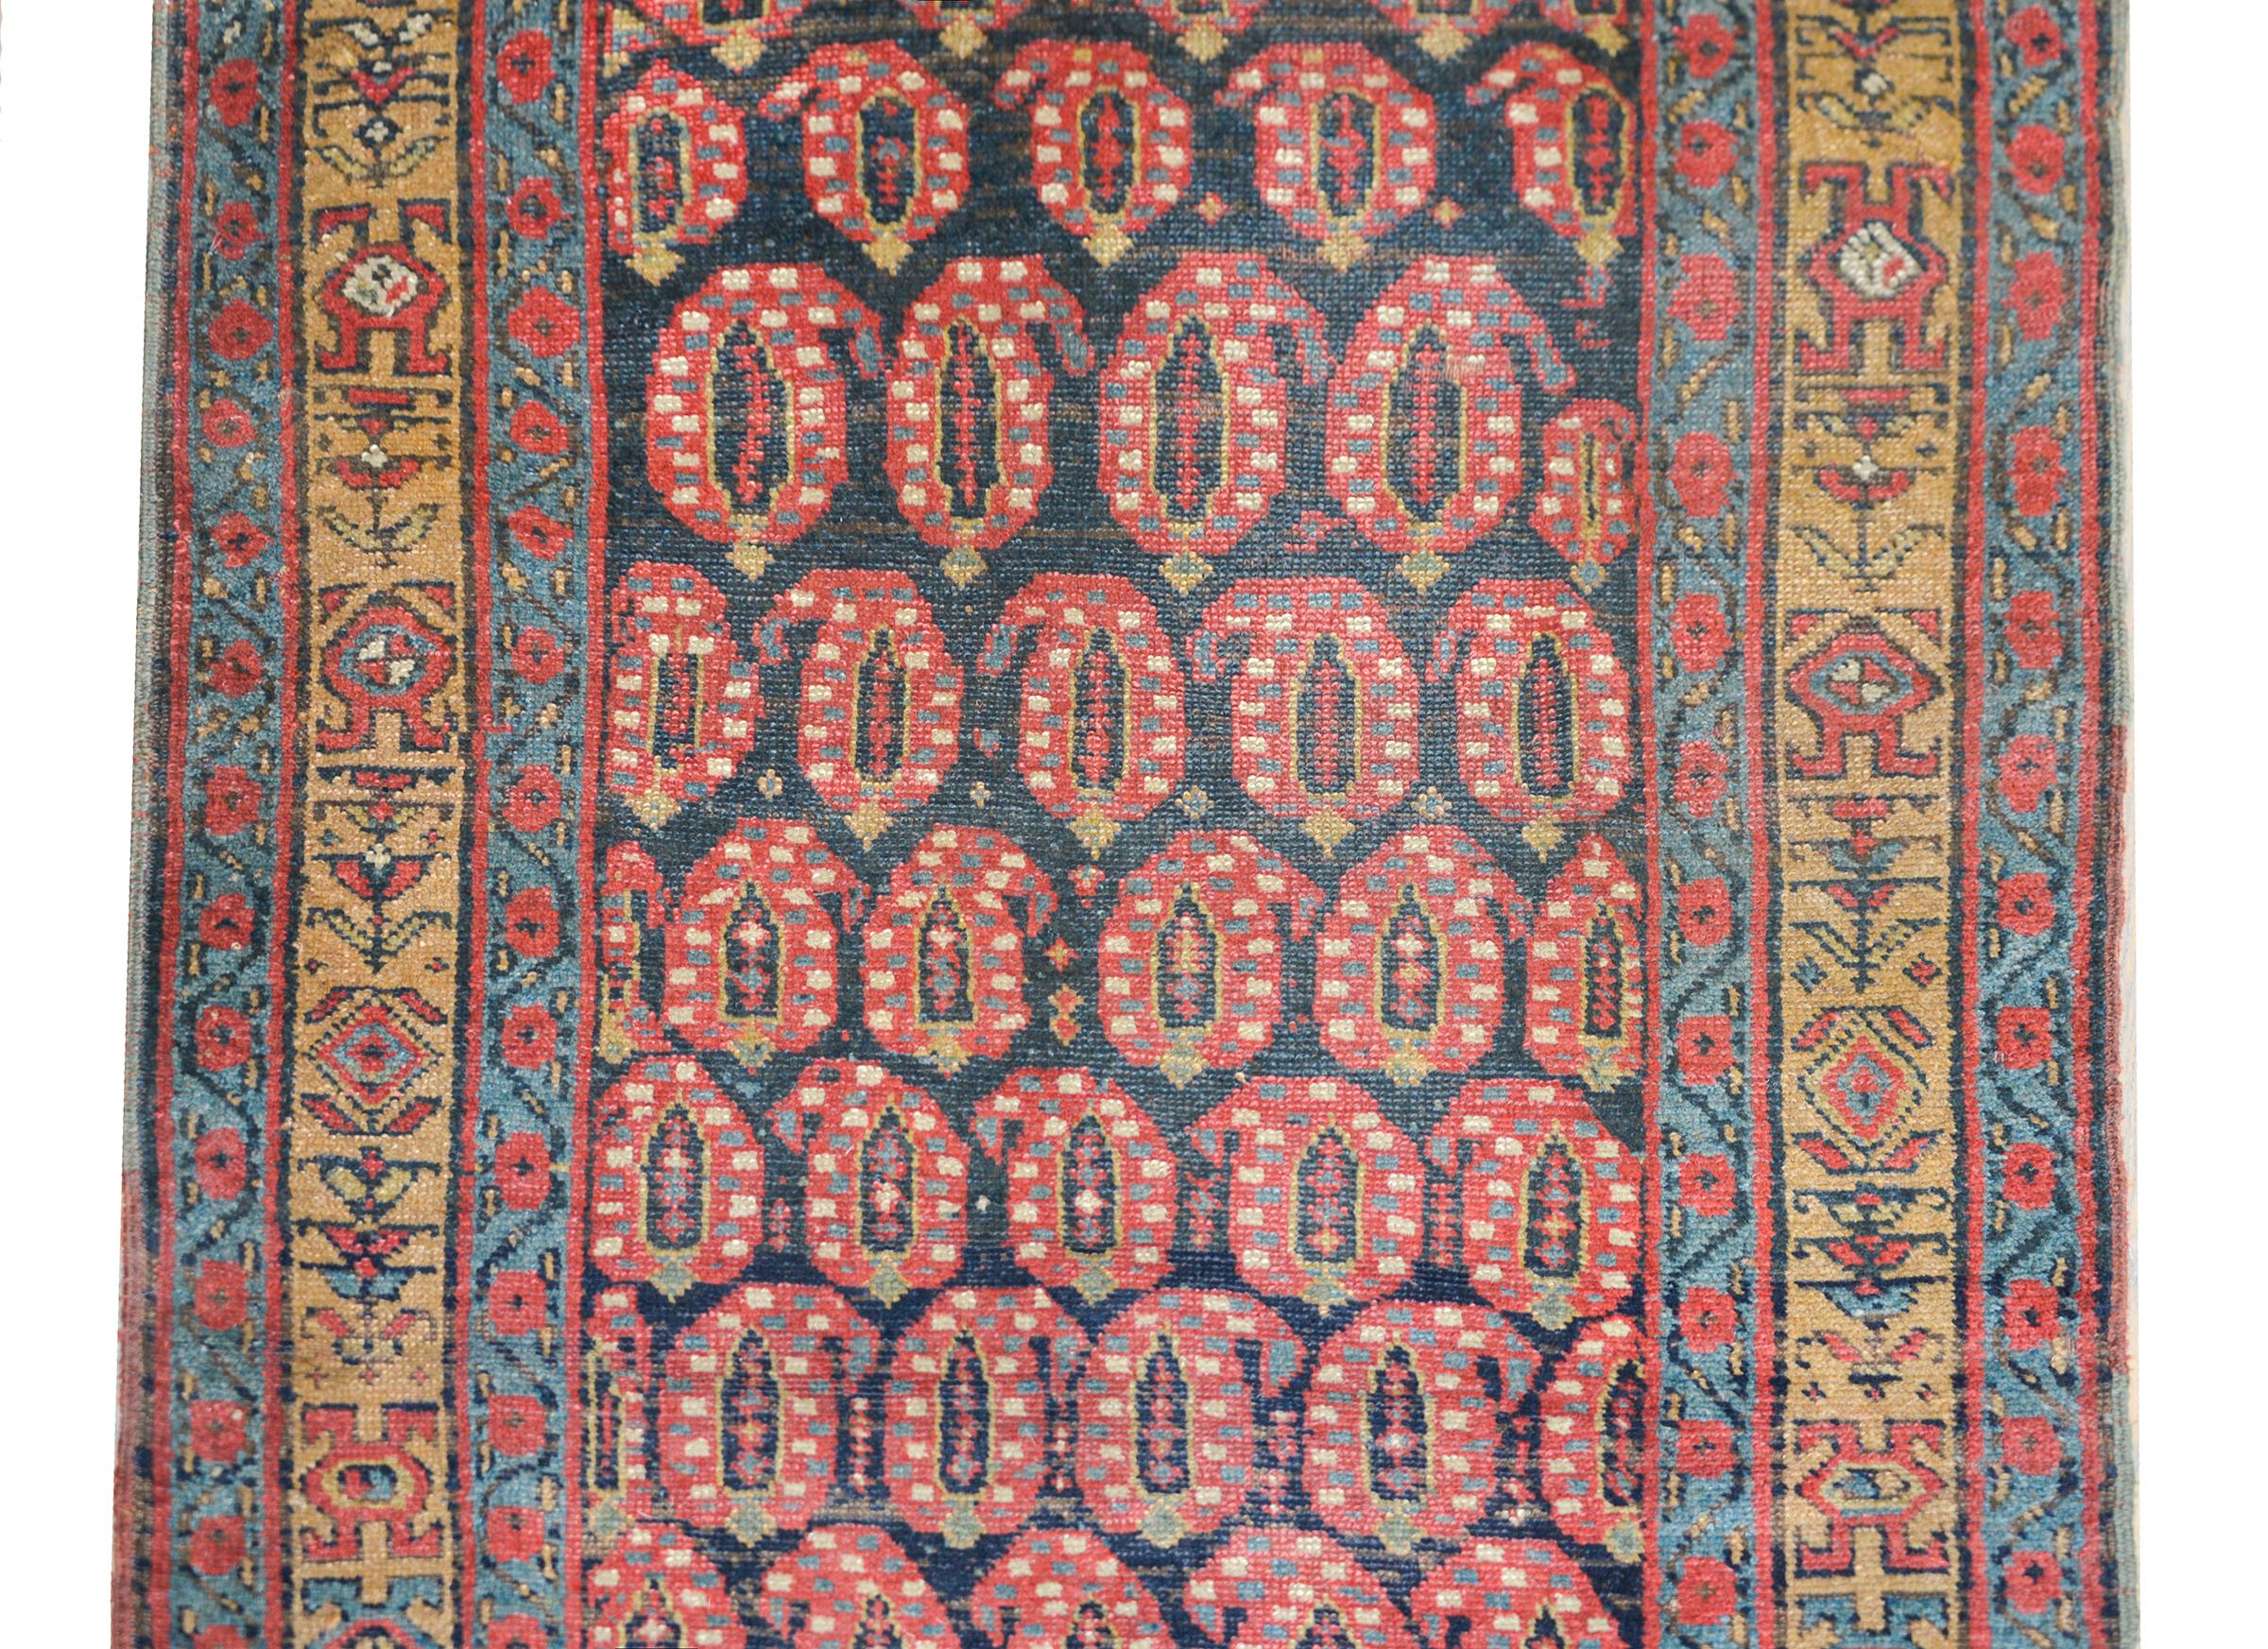 A wonderful early 20th century N.W. Persian runner with an all-over paisley pattern woven in crimson, gold, light indigo, and white and all set against a dark indigo background. The border is sweet with a central stylized floral patterned stripe